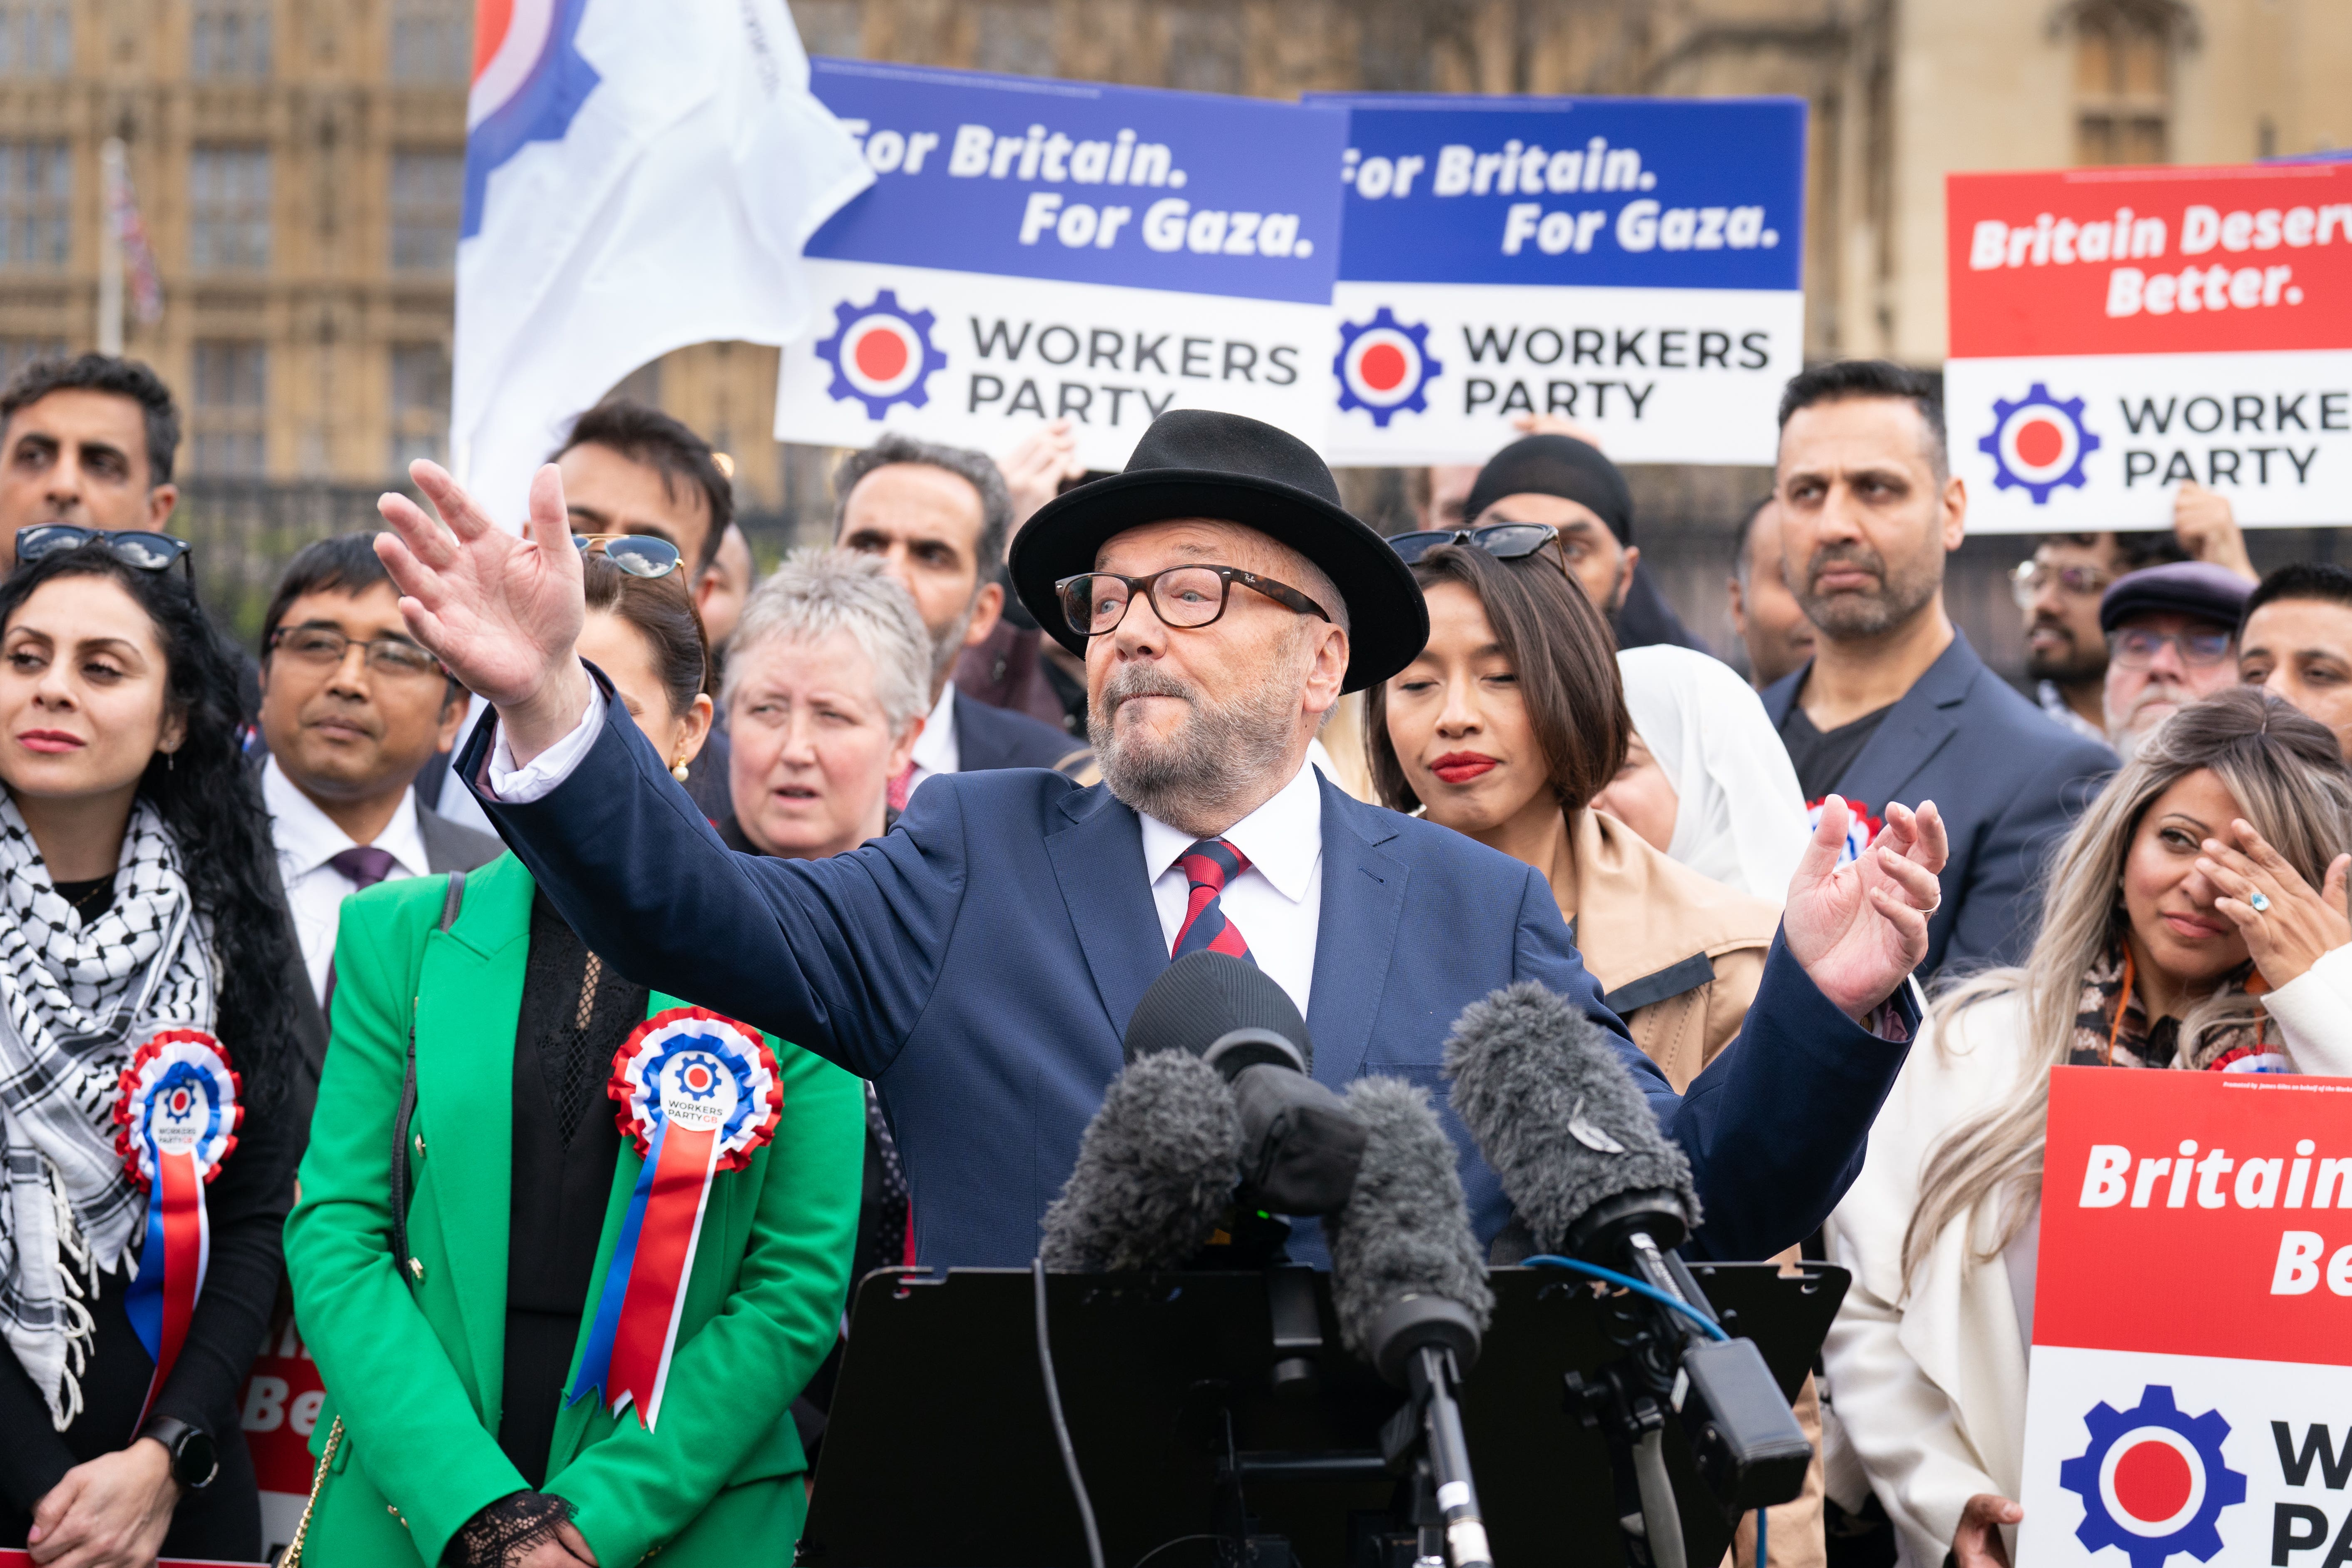 George Galloway said a woman alleged to have been assaulted was a Workers Party polling station attendant